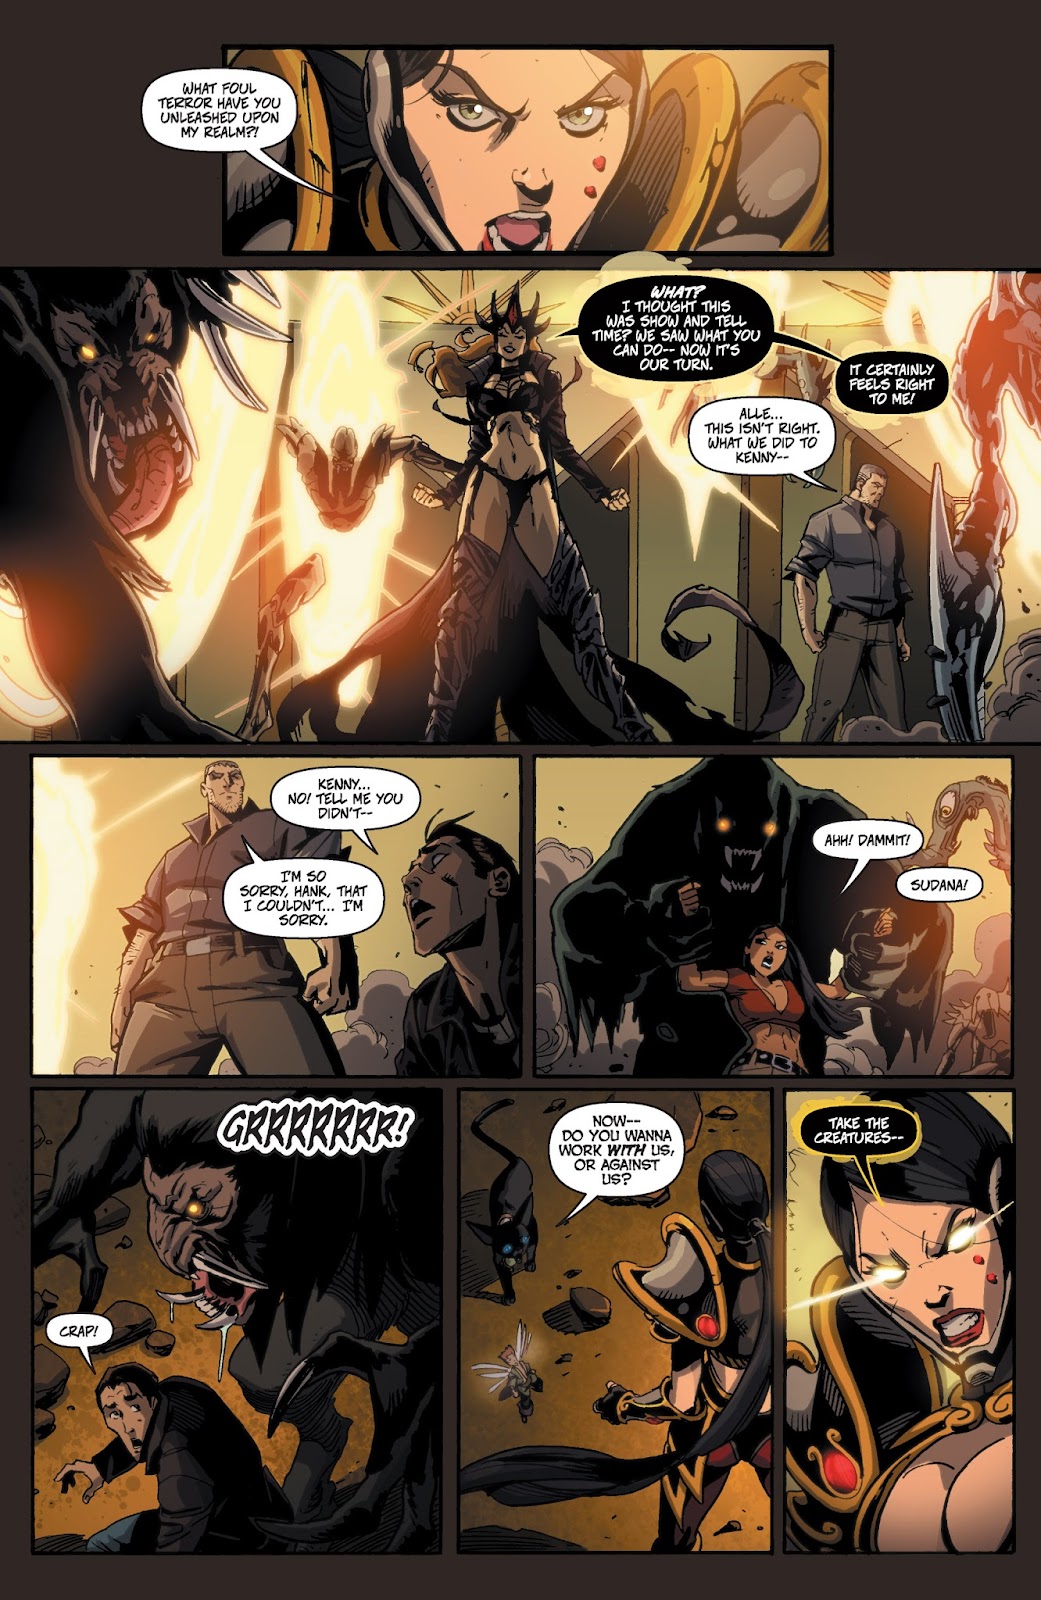 Charismagic (2013) issue 6 - Page 4